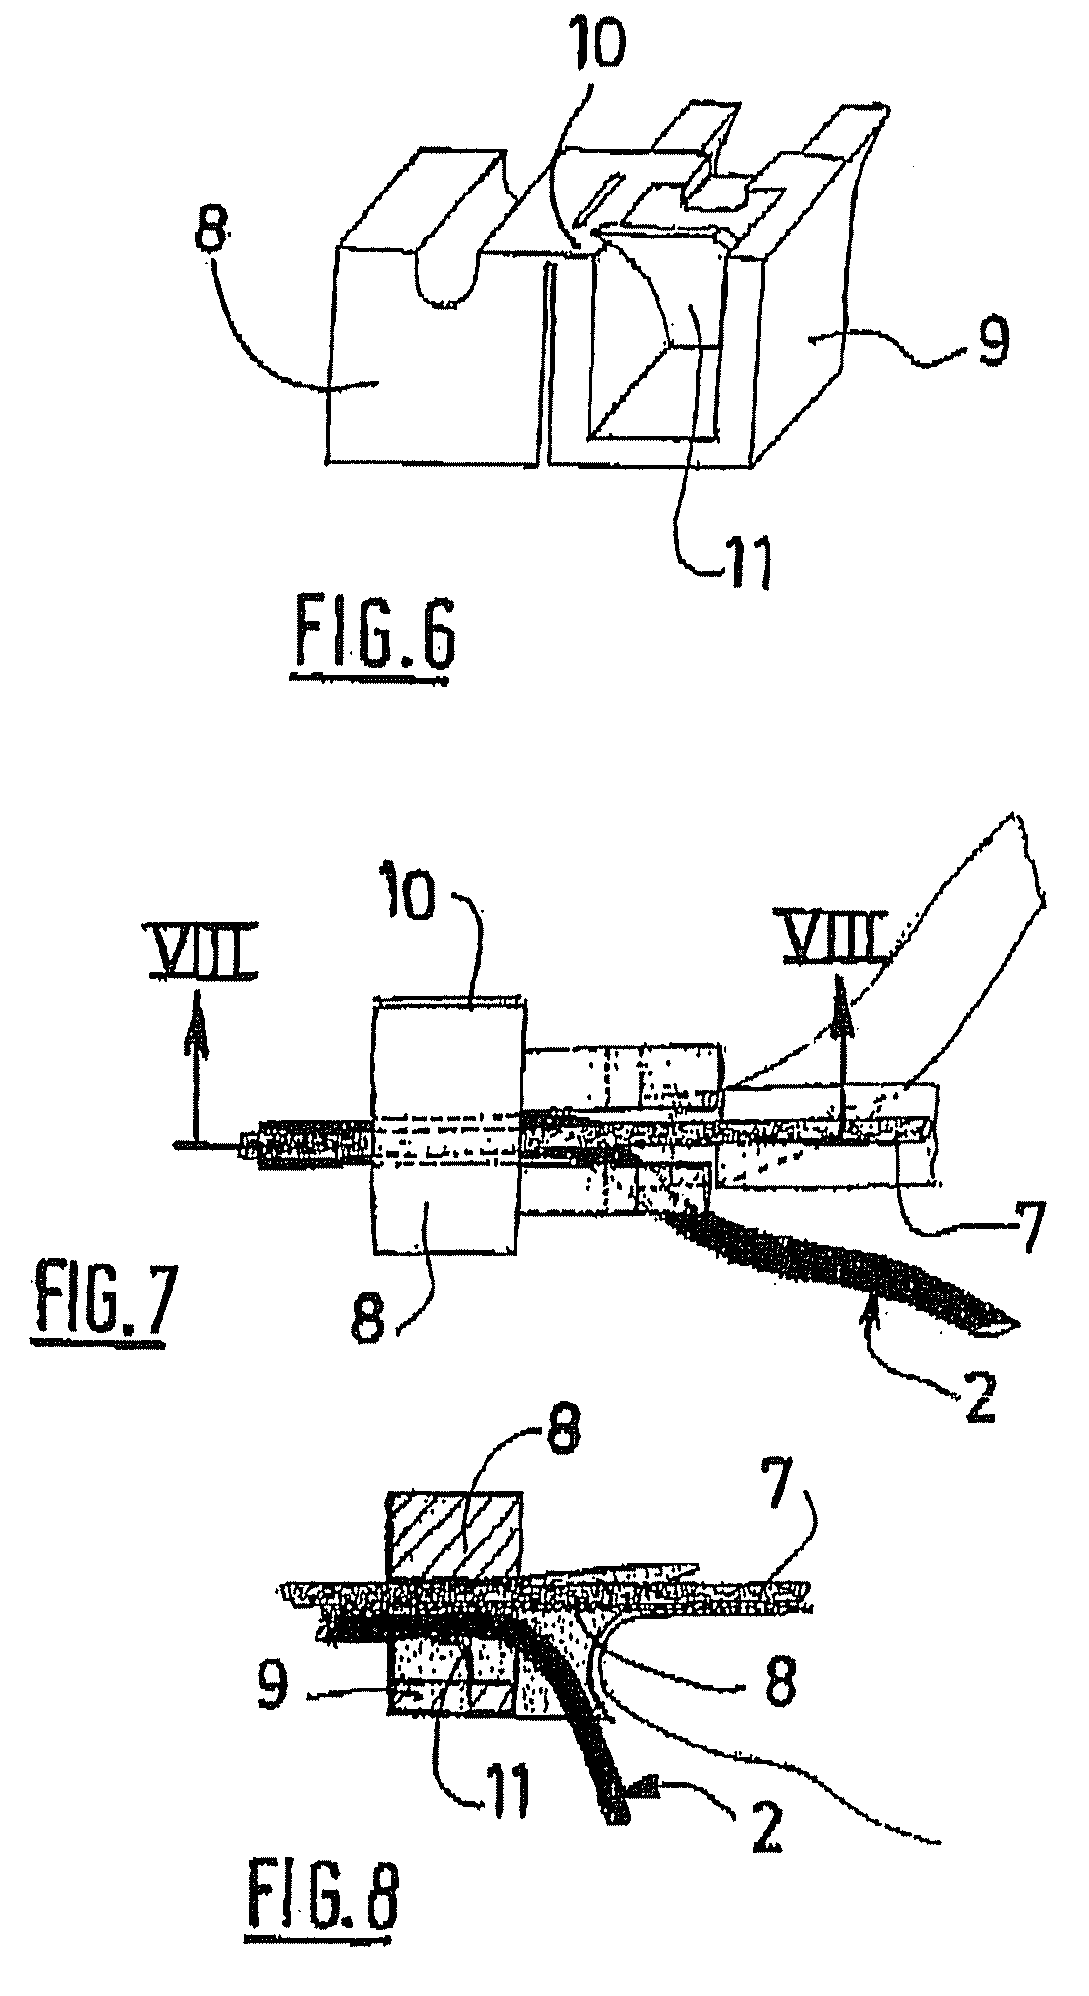 Identification device for visually identifying cables or ducts over their entire length